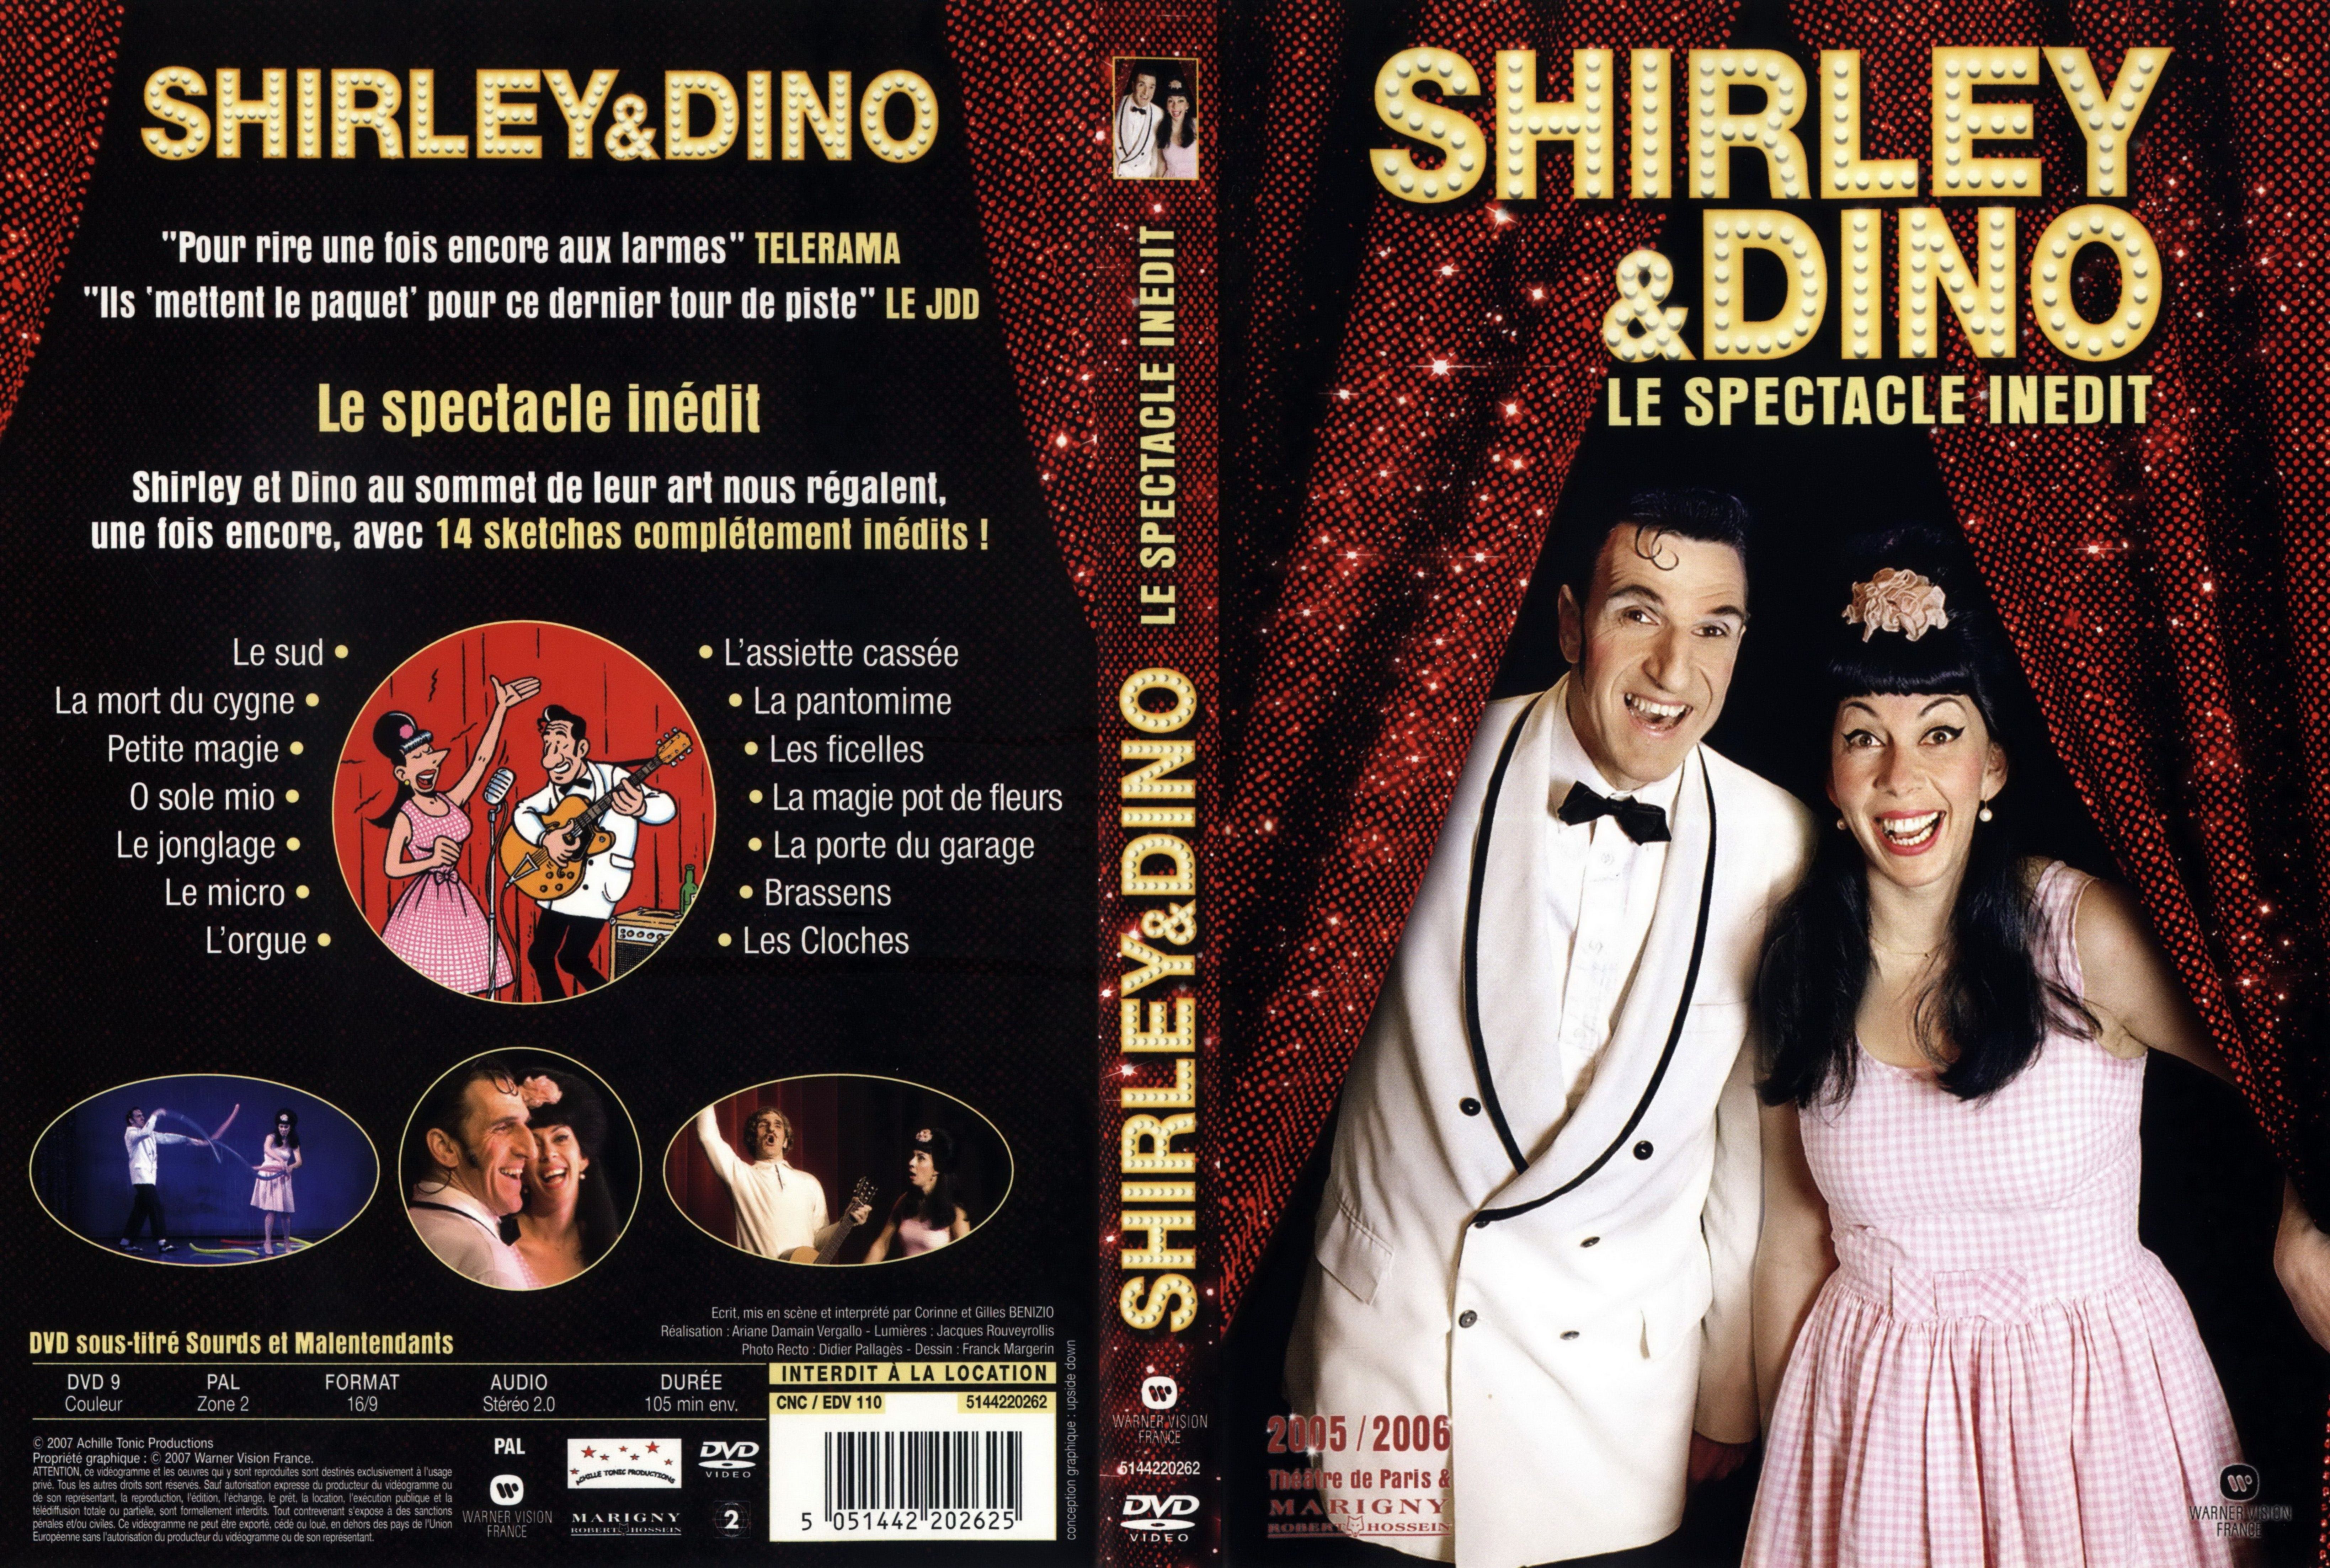 Jaquette DVD Shirley et Dino Le spectacle inedit v2